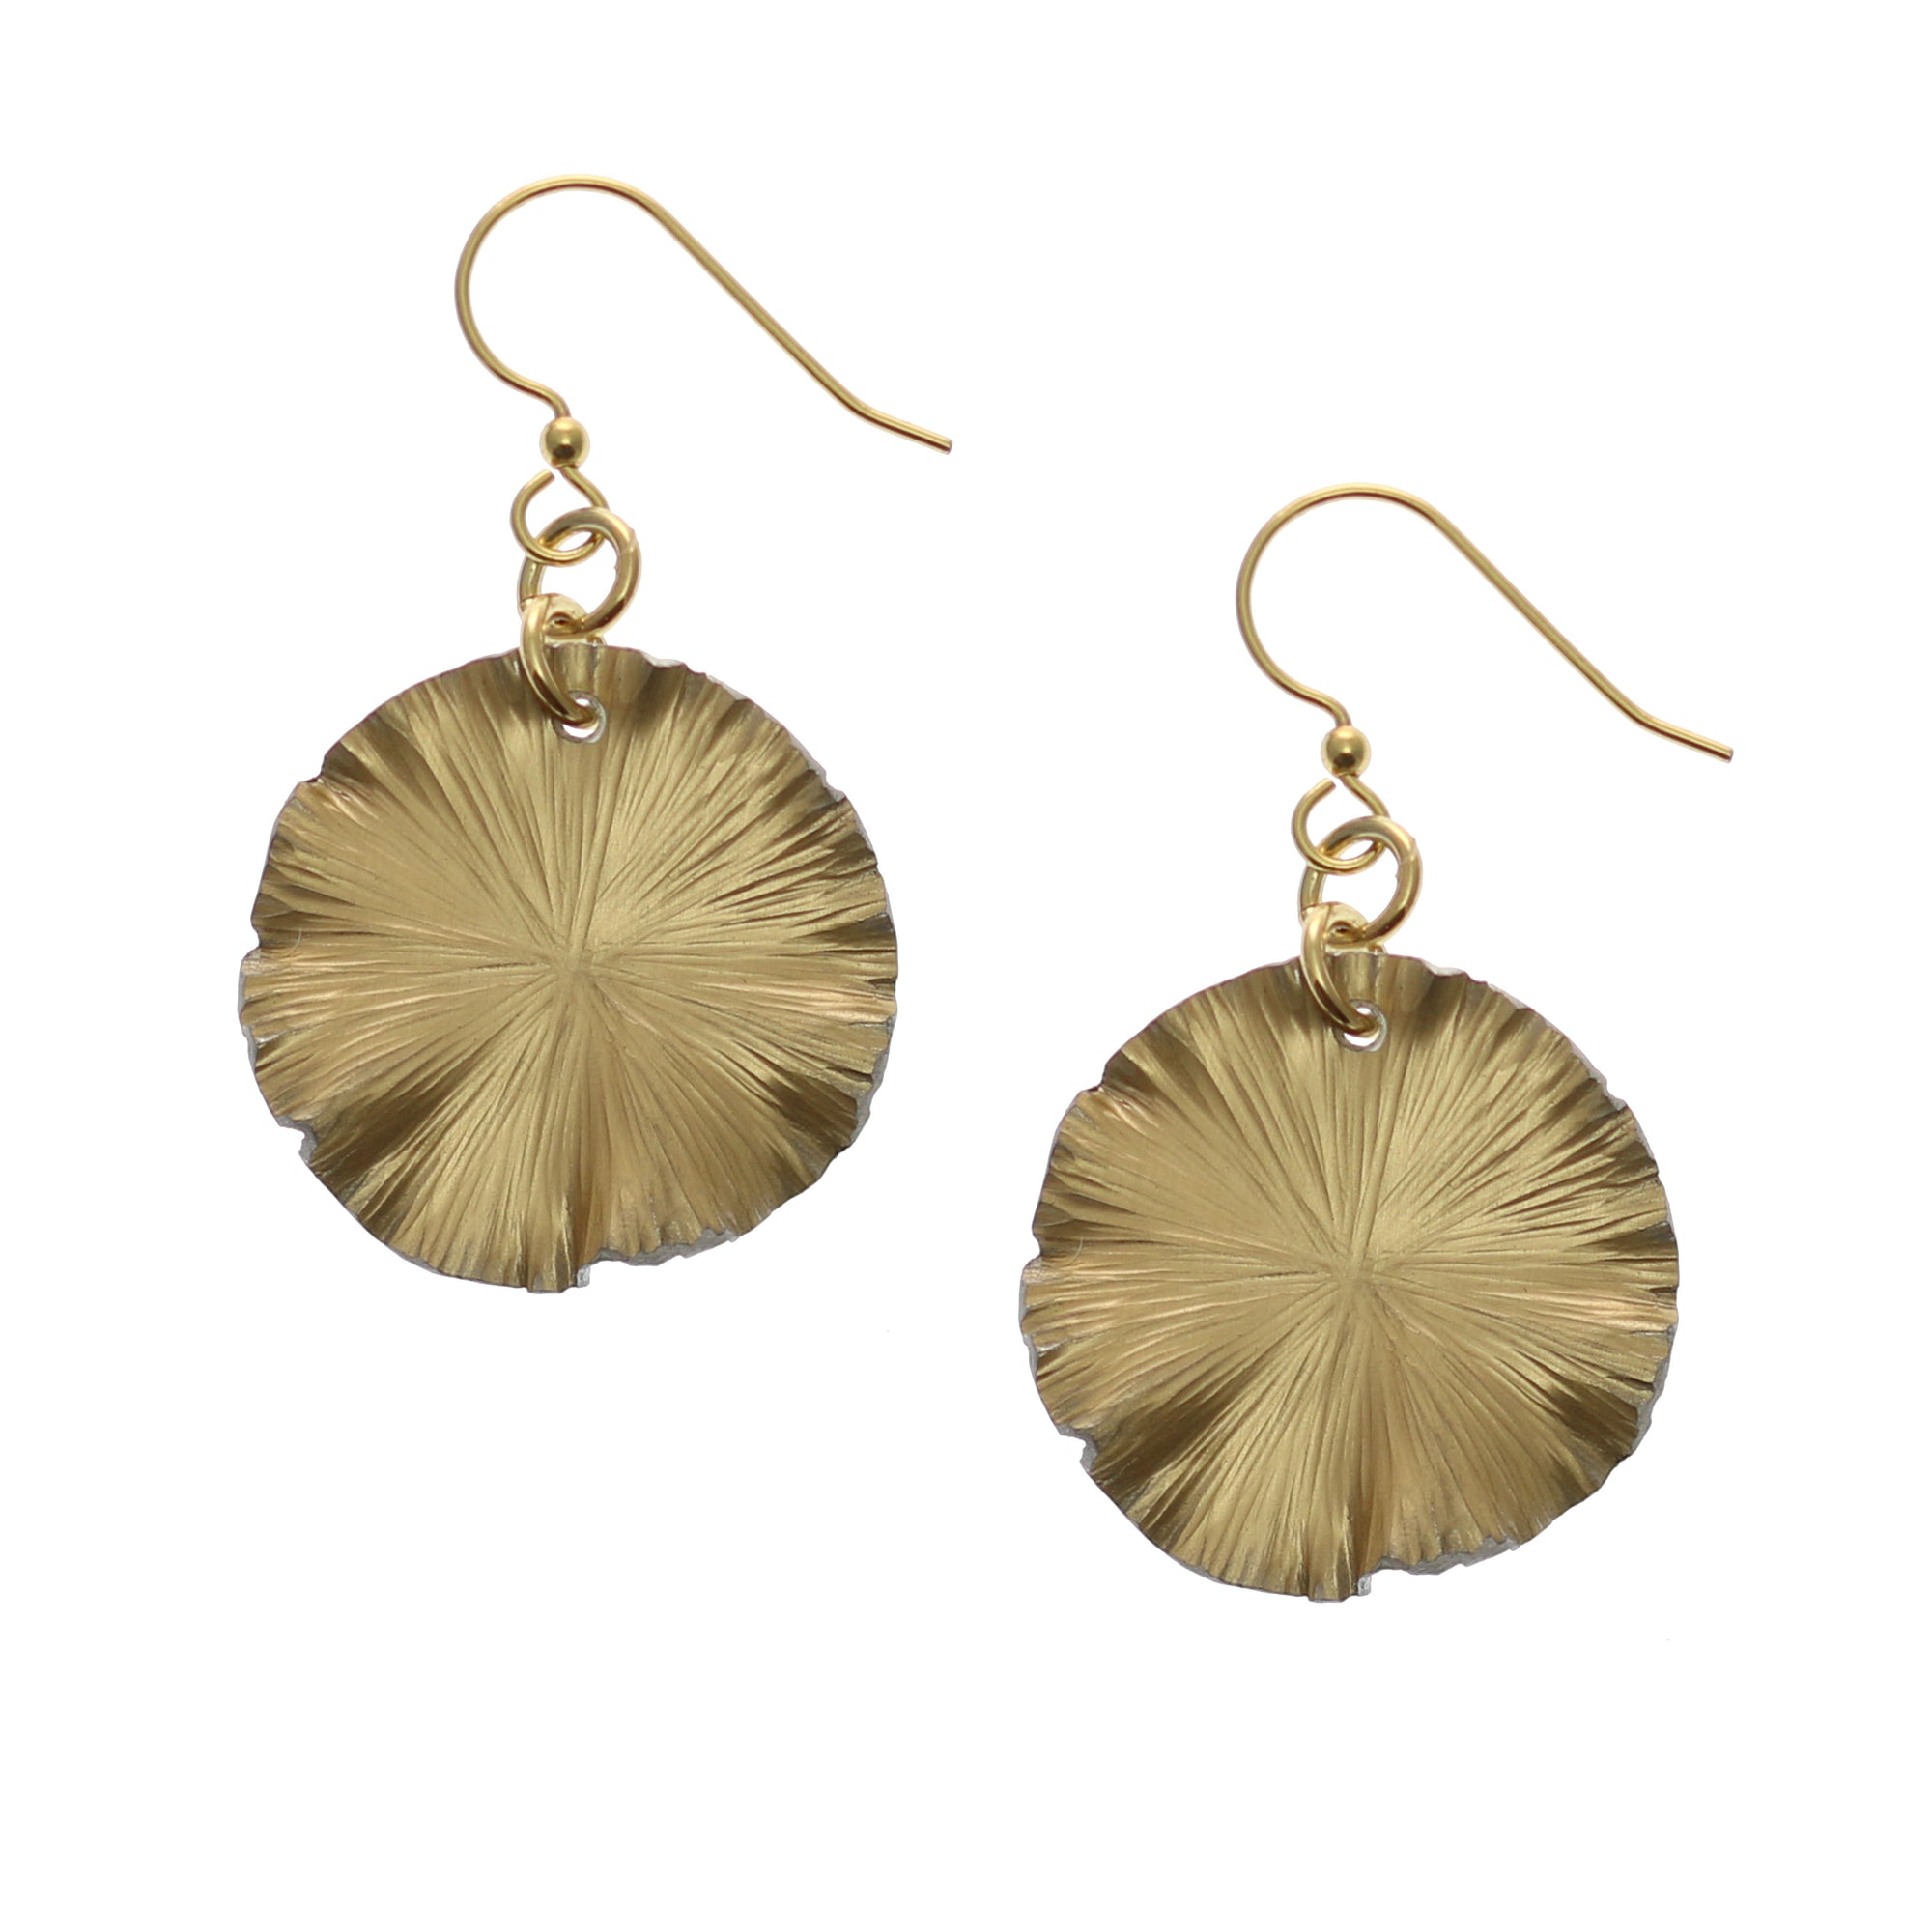 Small Gold Anodized Lily Pad Leaf Drop Earrings